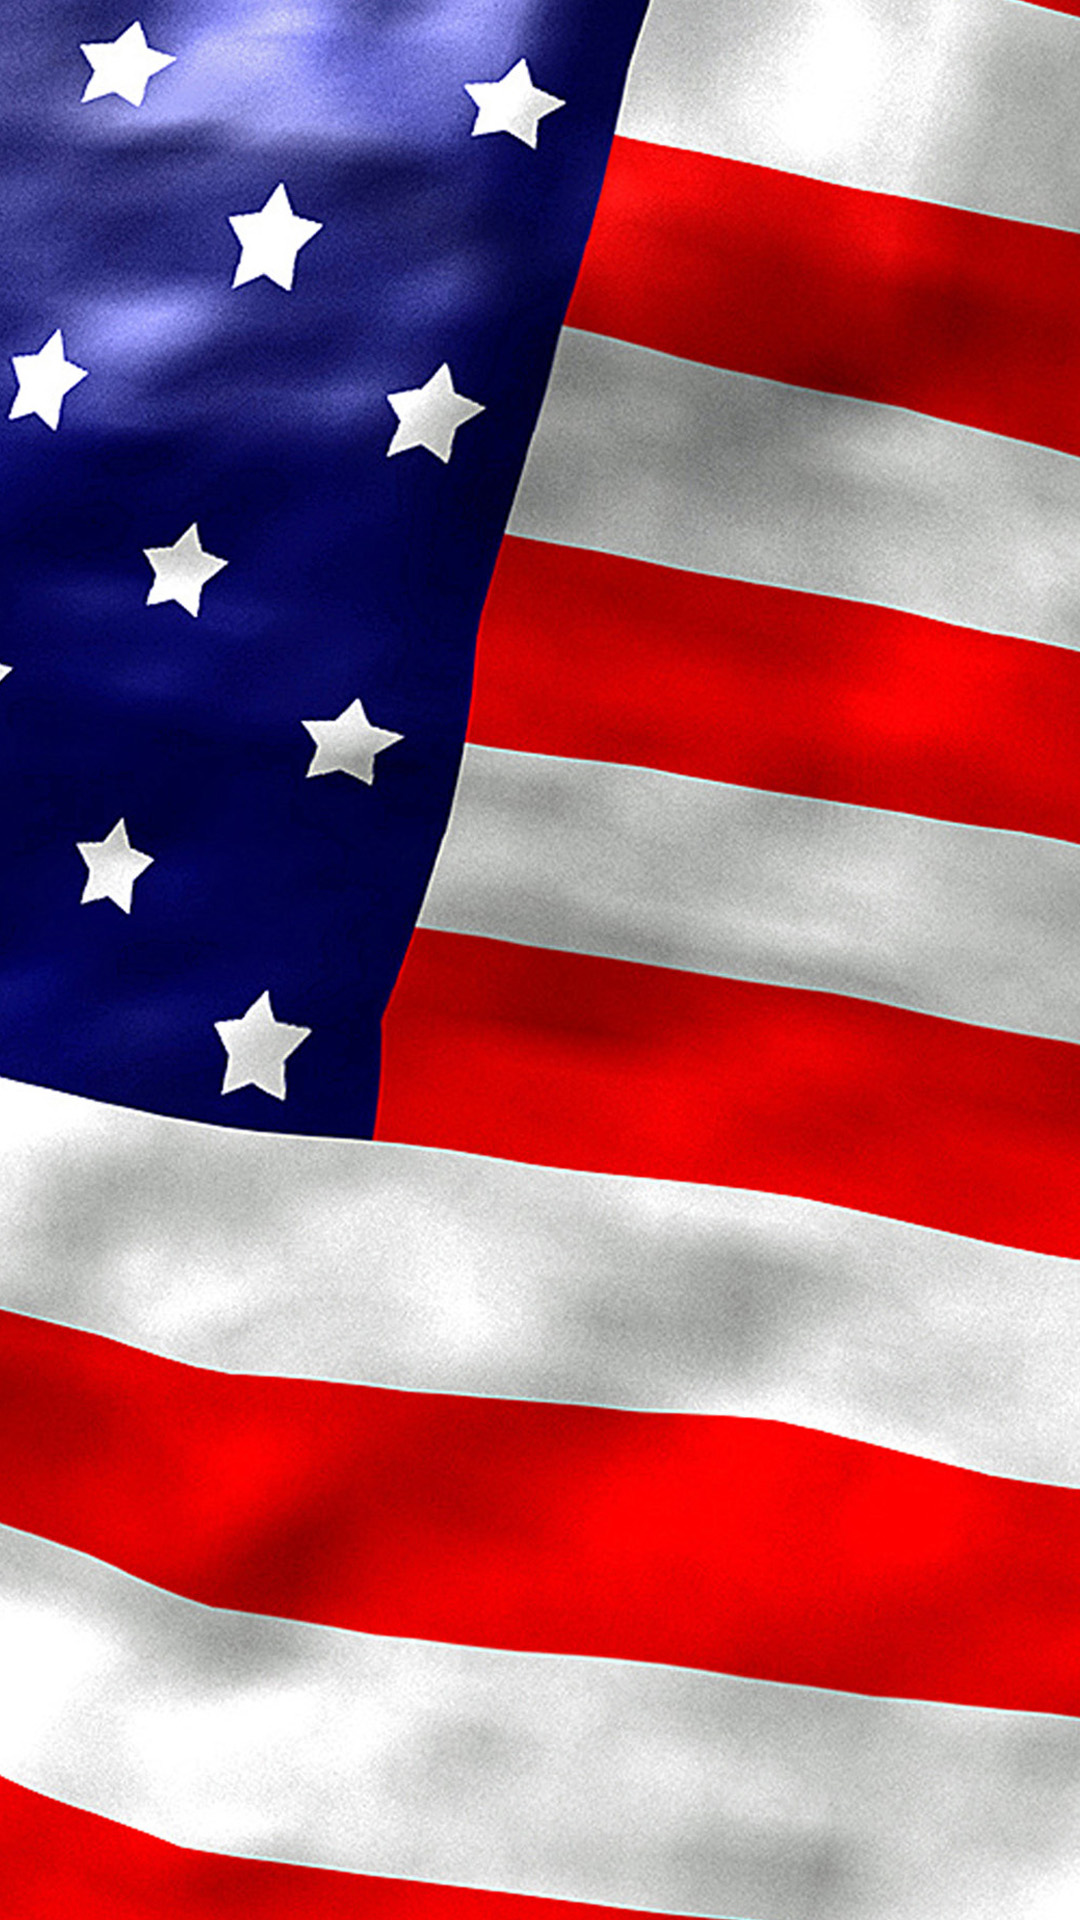 Us Flag Wallpaper IPhone 5 78 images